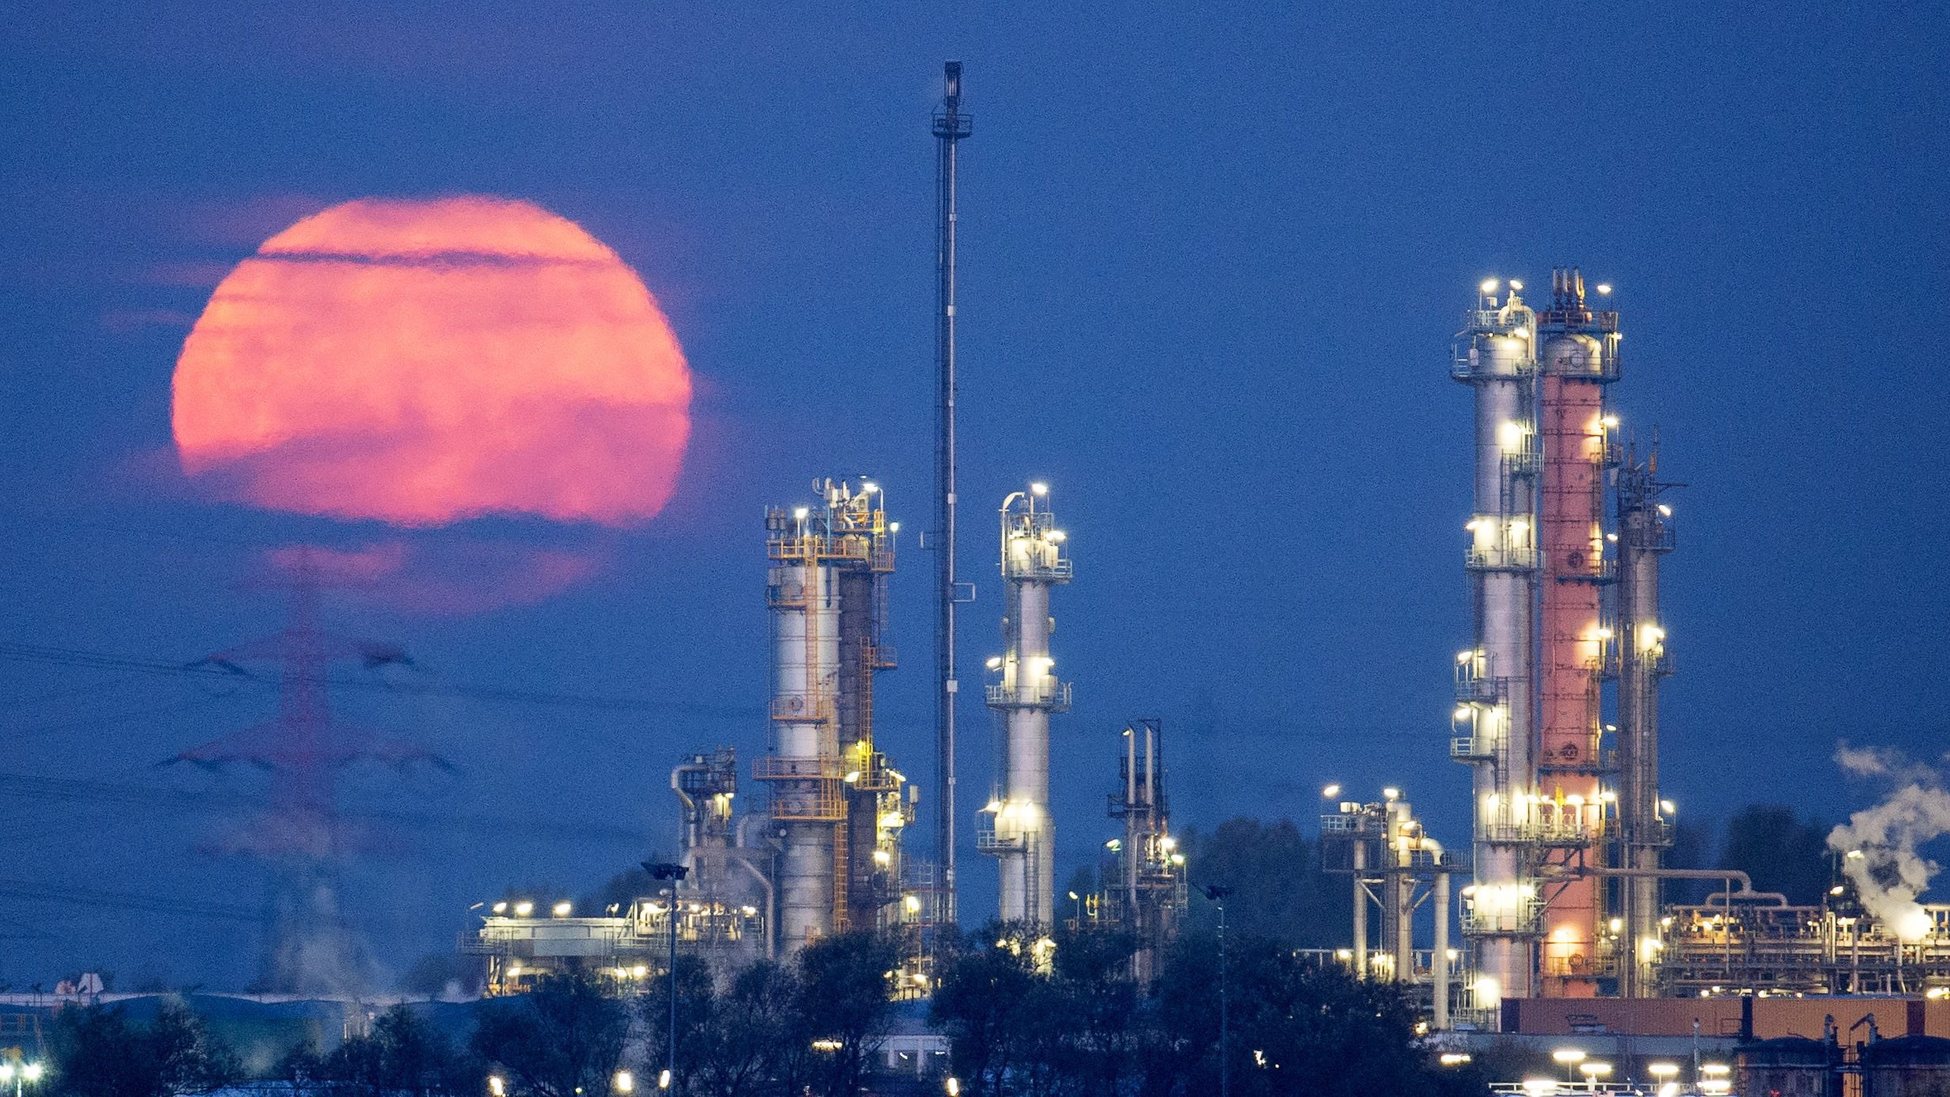 epa04998025 A full moon glows red behind an oil refinery in the port of Hamburg, Germany, 27 October 2015. Sunshine was forecast in the city, though mild autumnal temperatures were predicted.  EPA/DANIEL REINHARDT